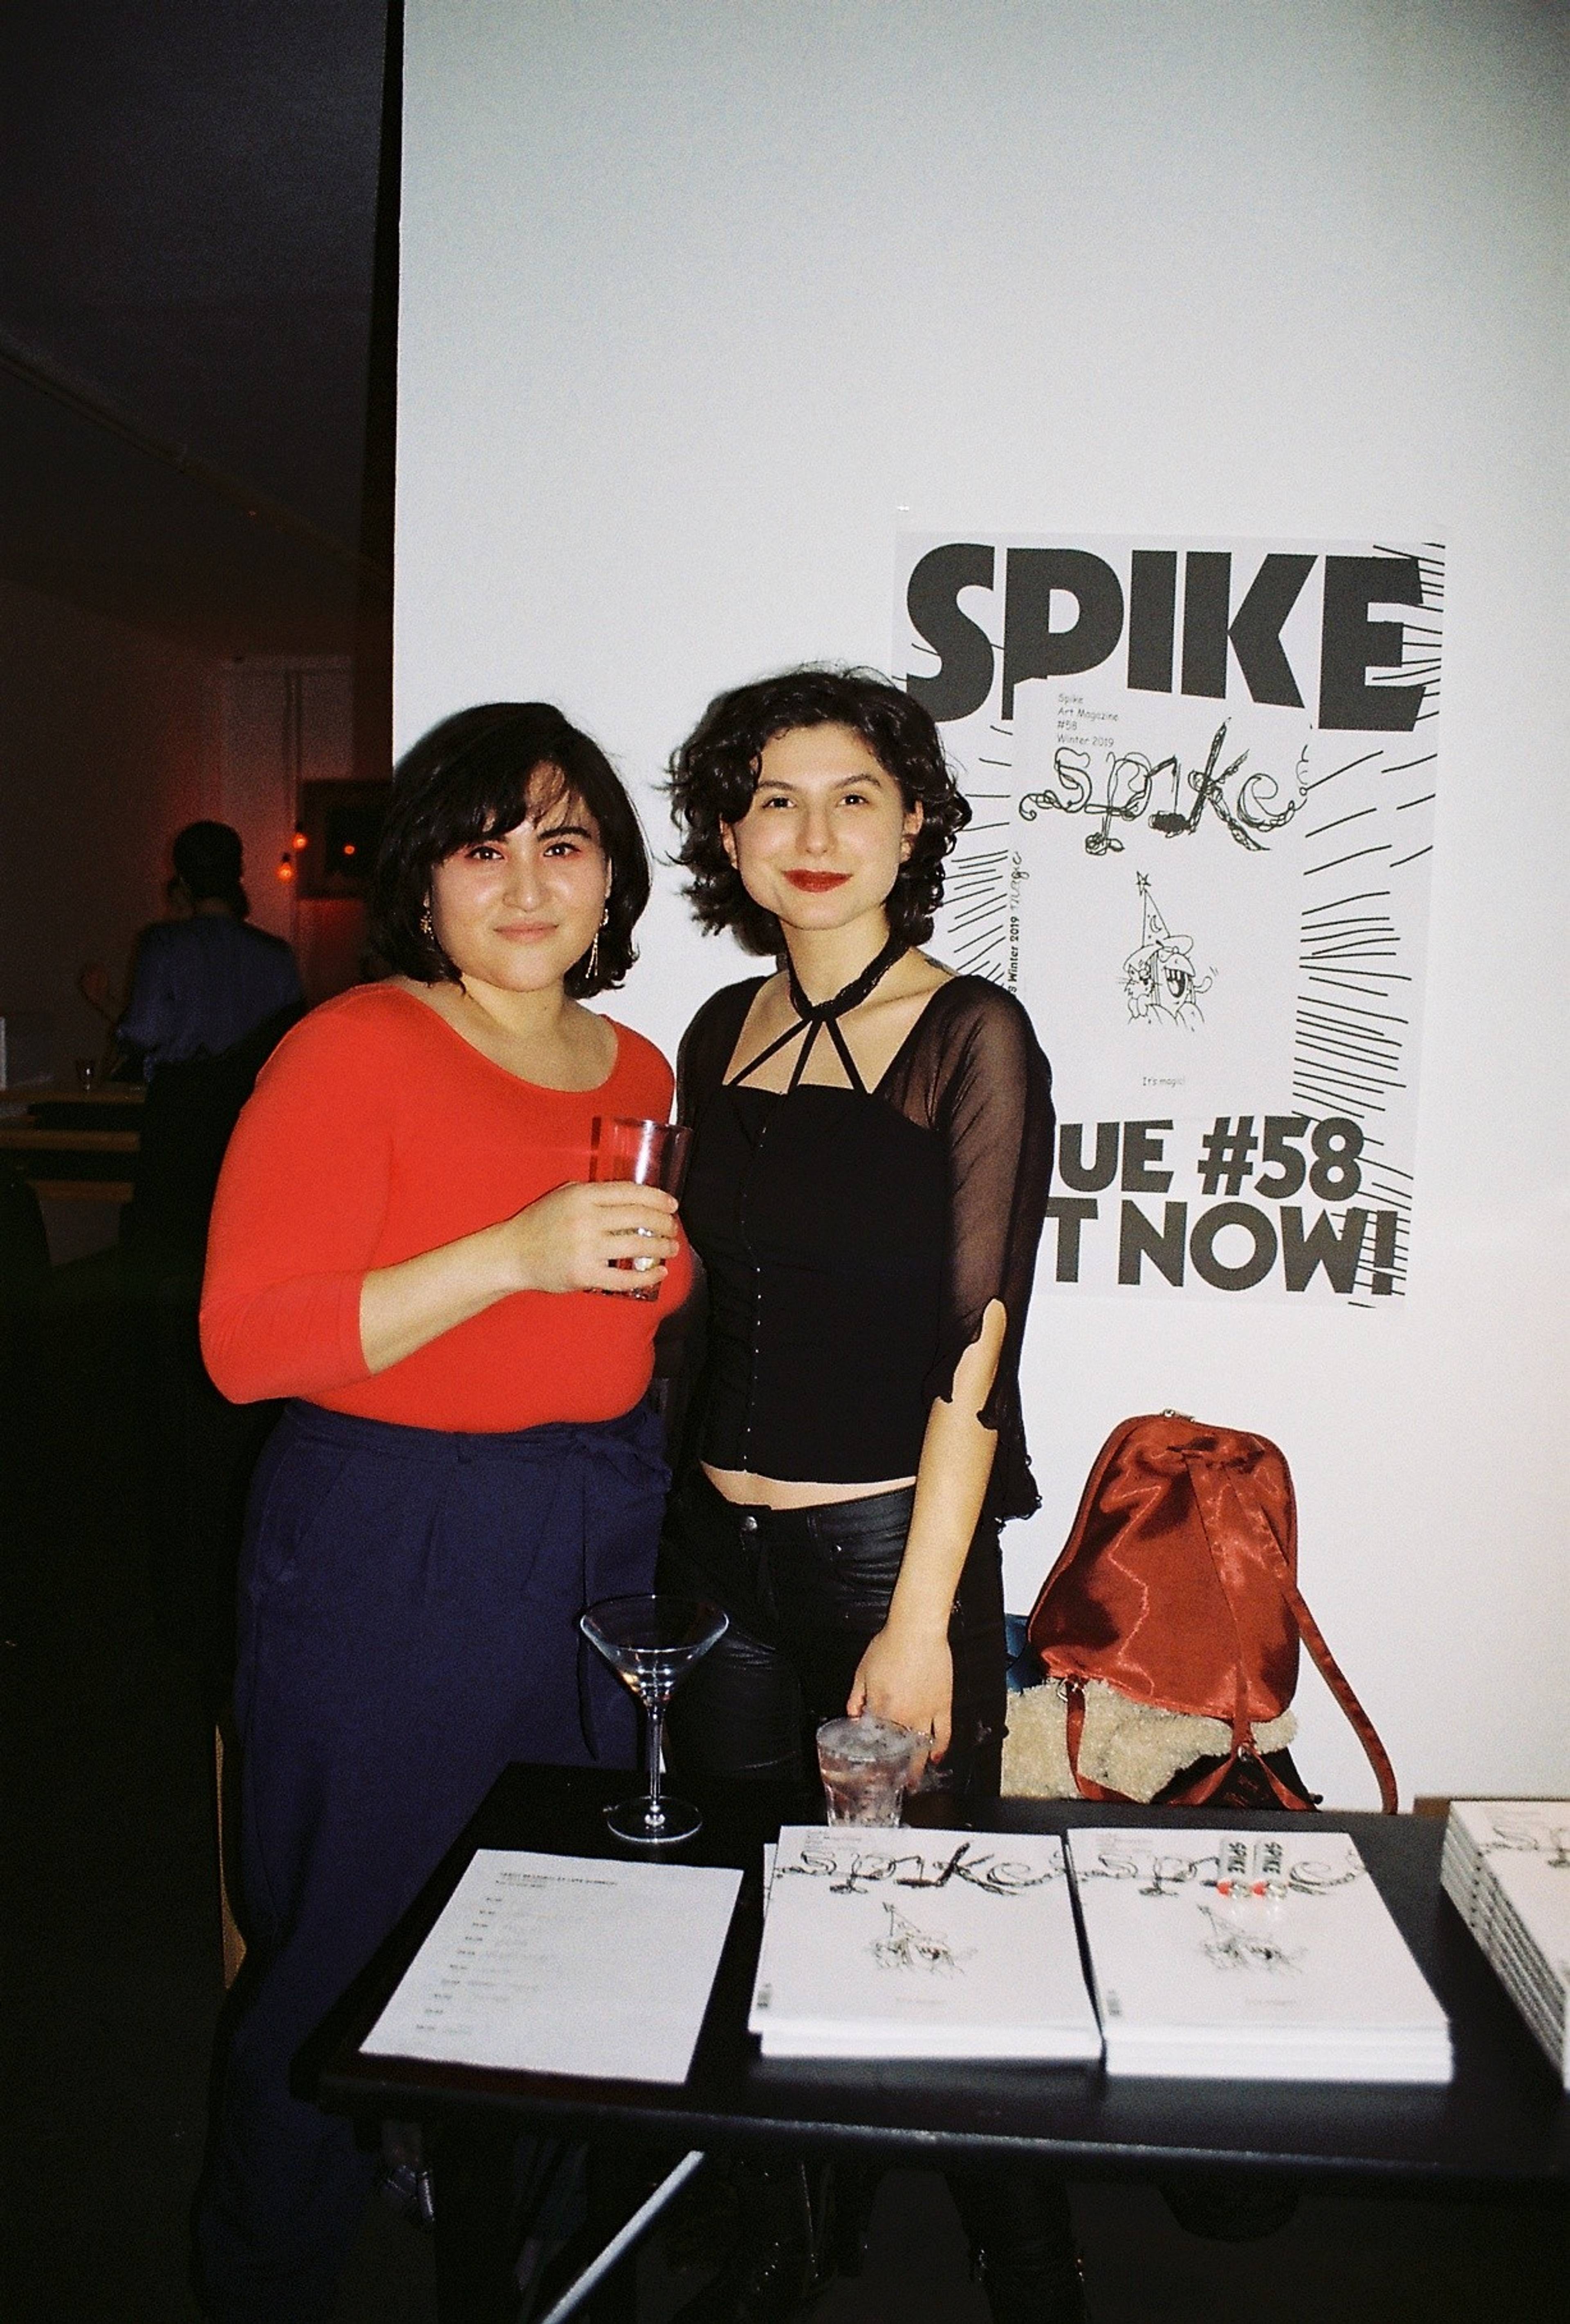 Spike Launch Party Magic Issue